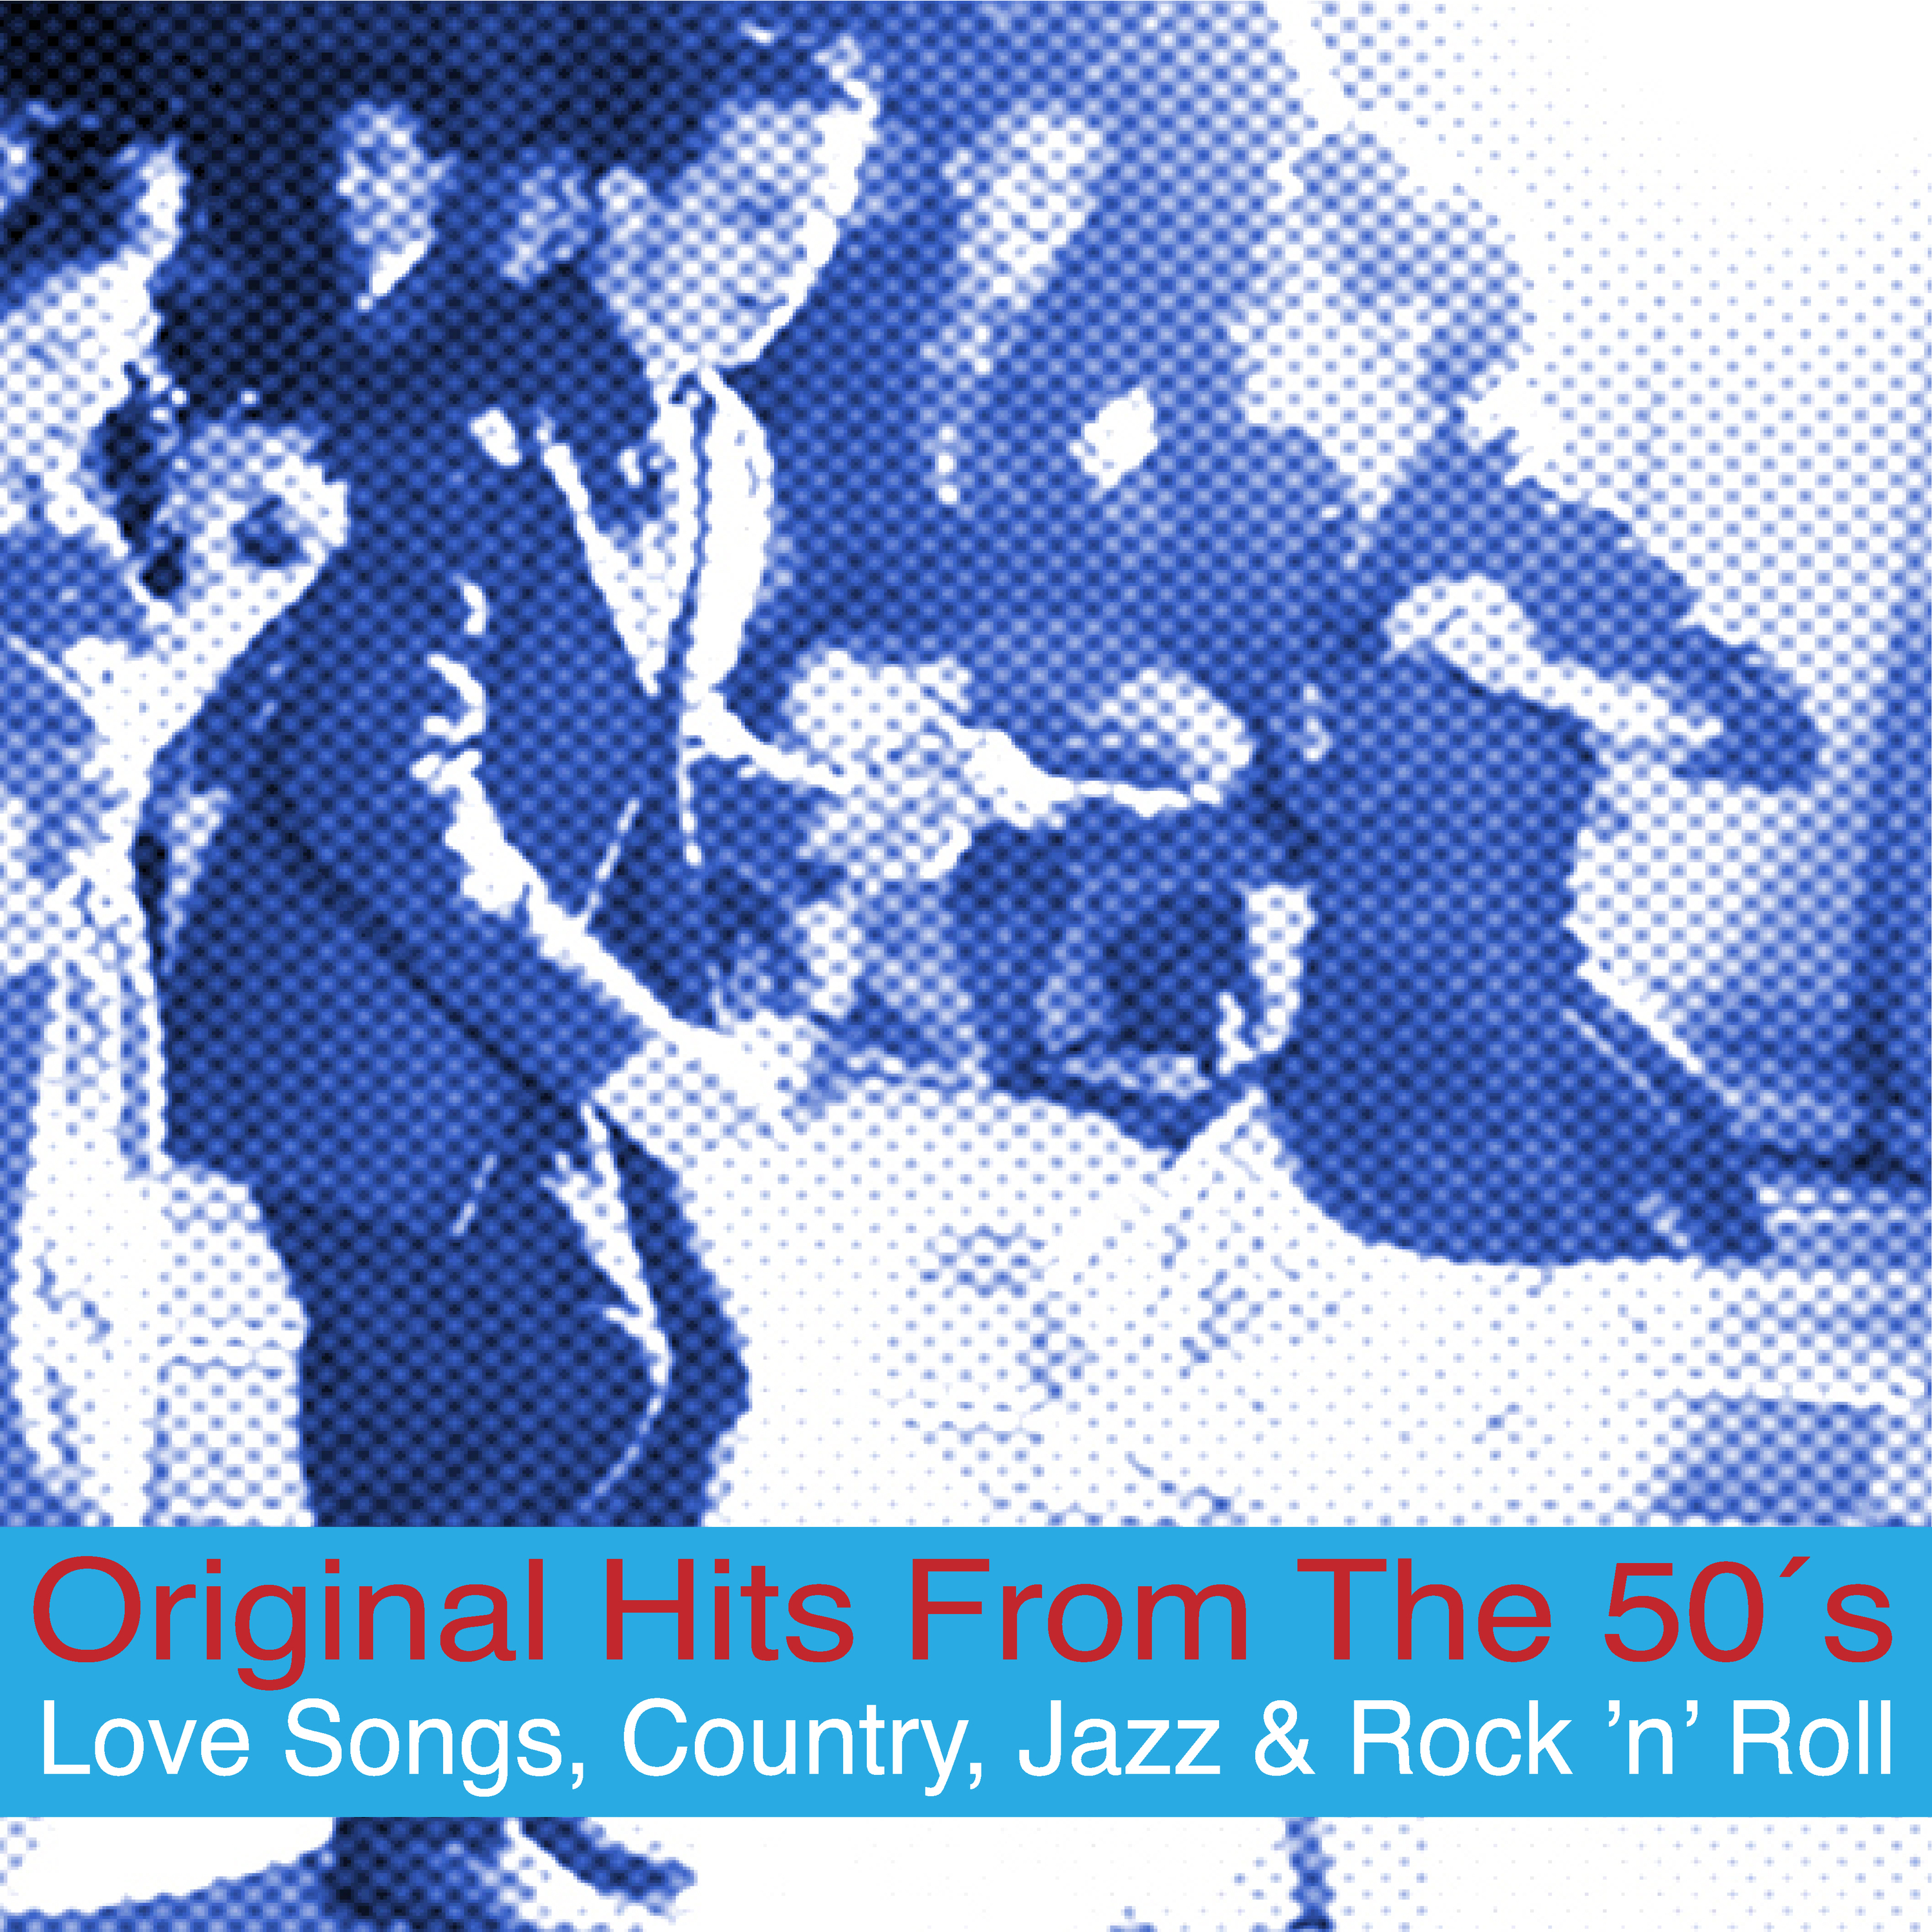 Original Hits from the 50's (Love Songs, Country, Jazz & Rock 'n' Roll)